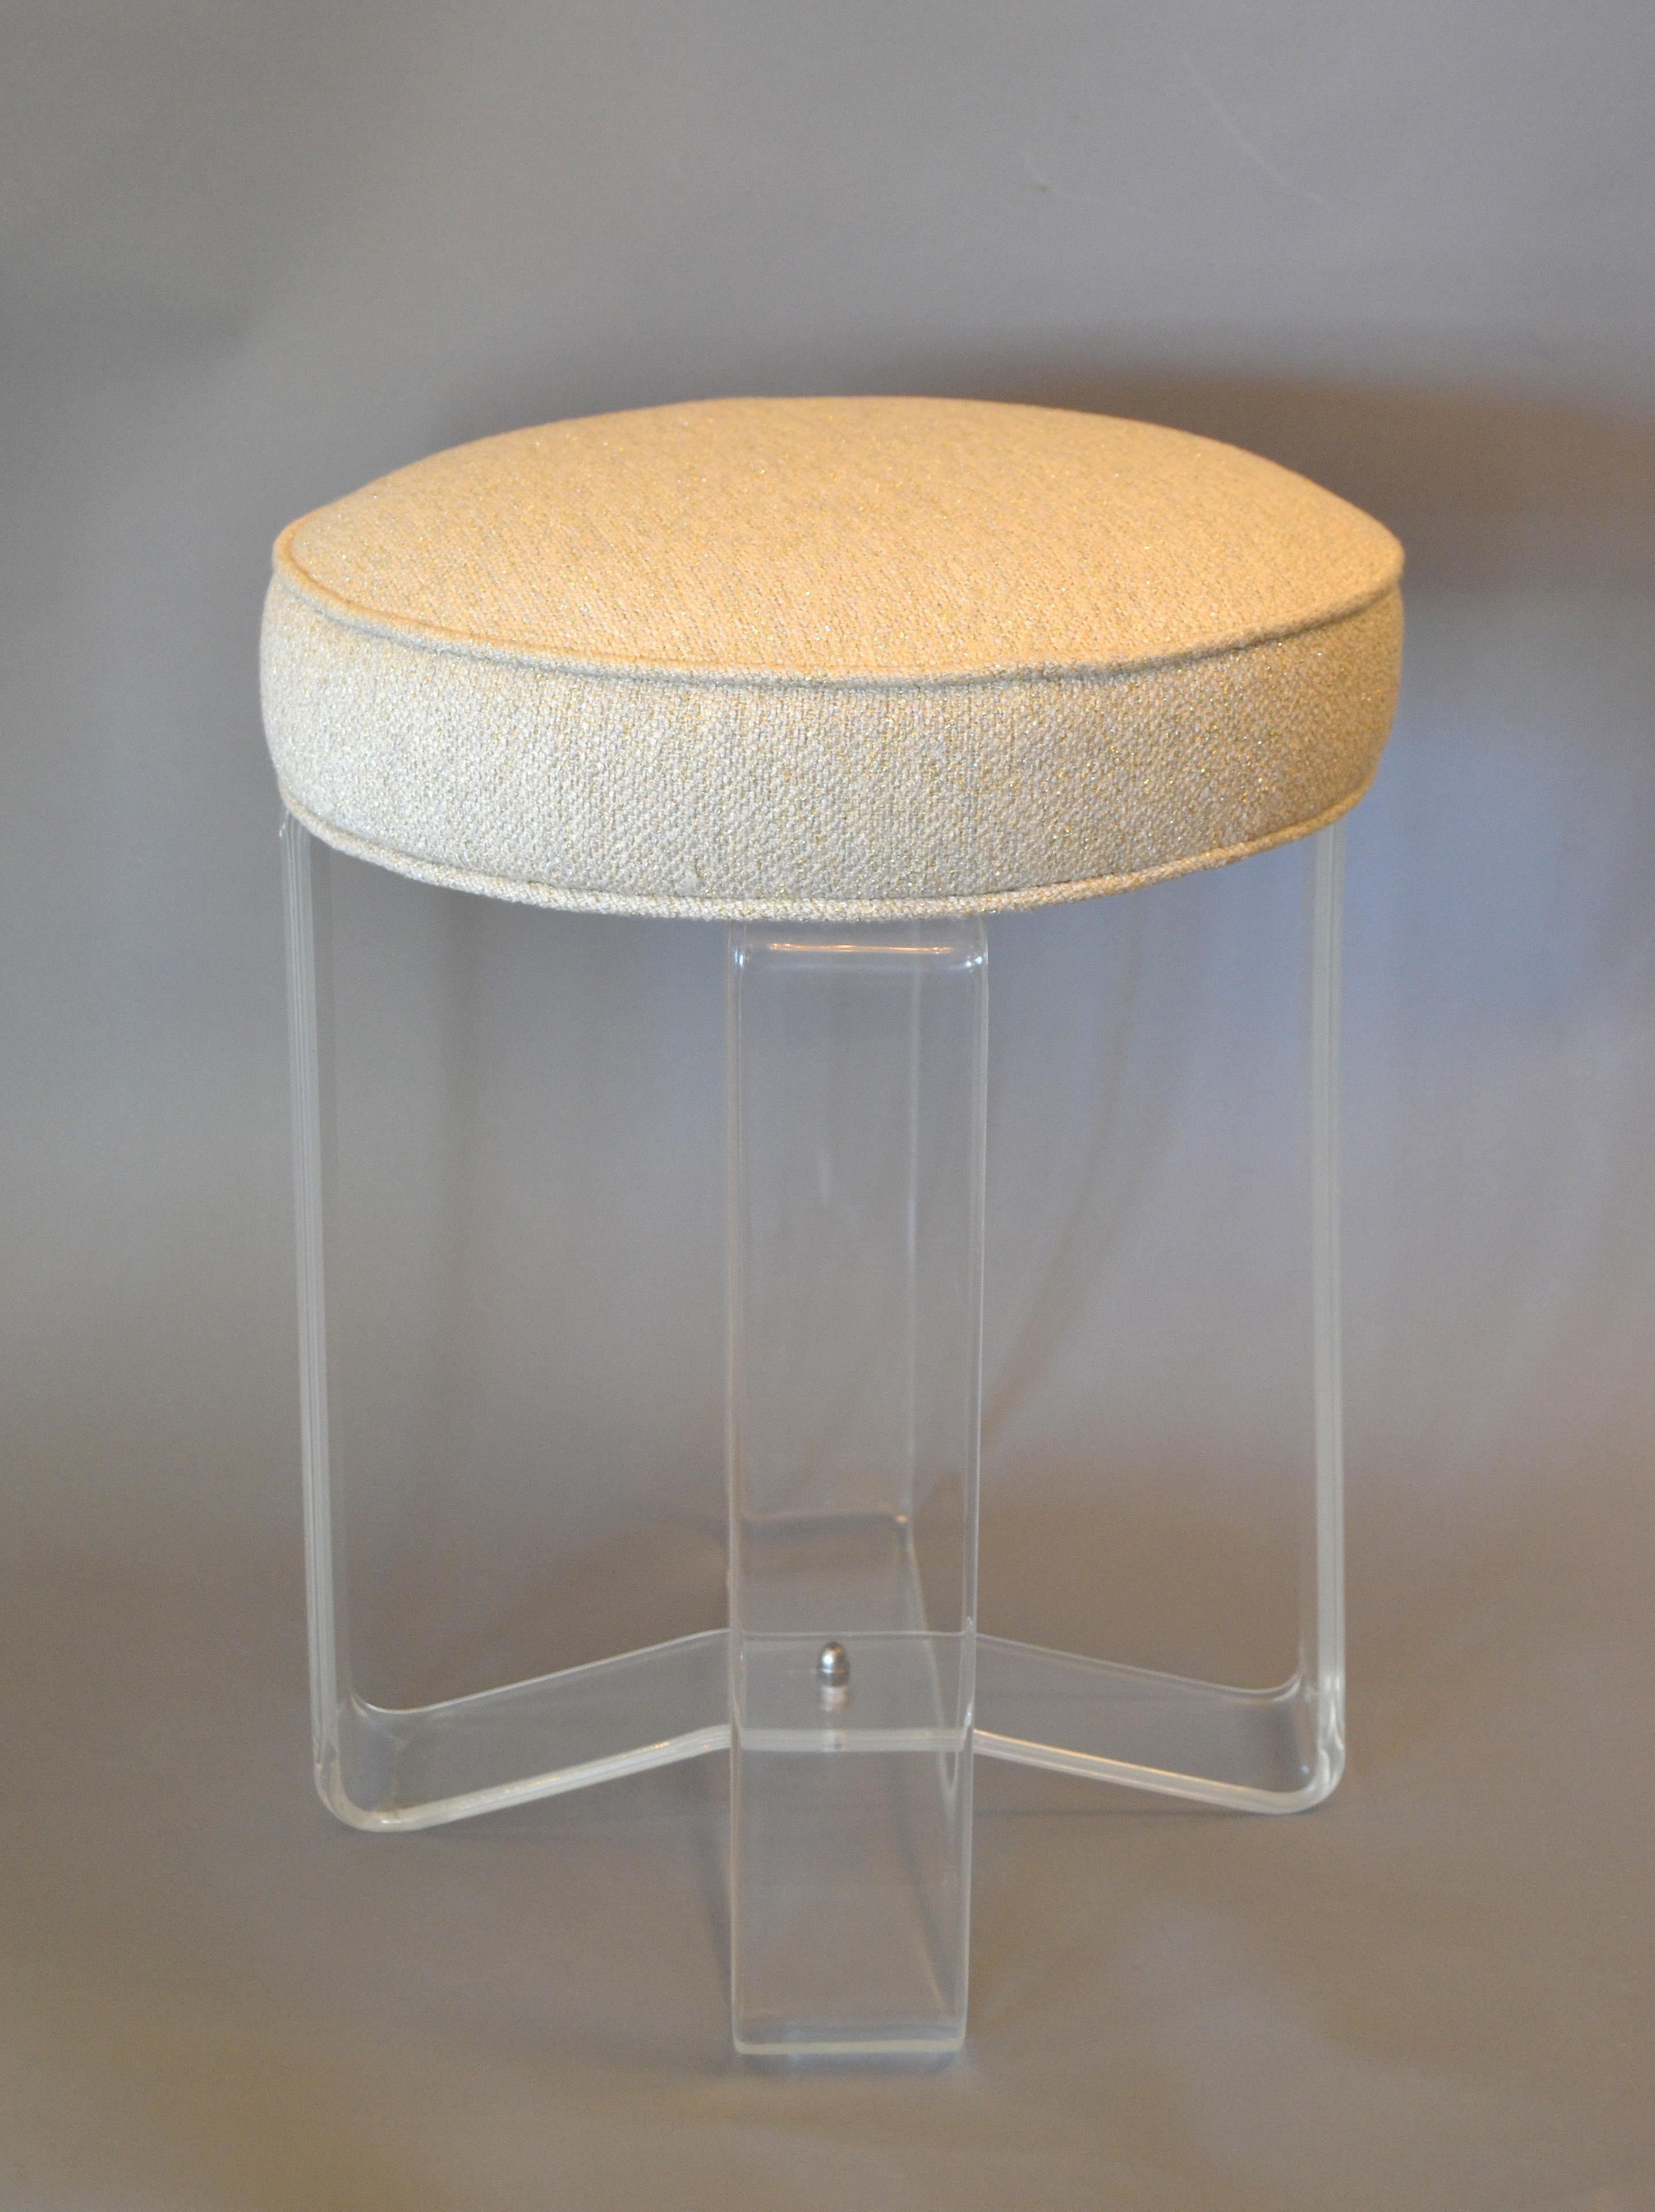 Hollywood Regency round Lucite stool features a transparent base with crissed-cross legs and a cream and gold sparkle boucle fabric upholstered soft seat.
Can be used as an extra seat, vanity stool or footstool.
It is a perfect combination of